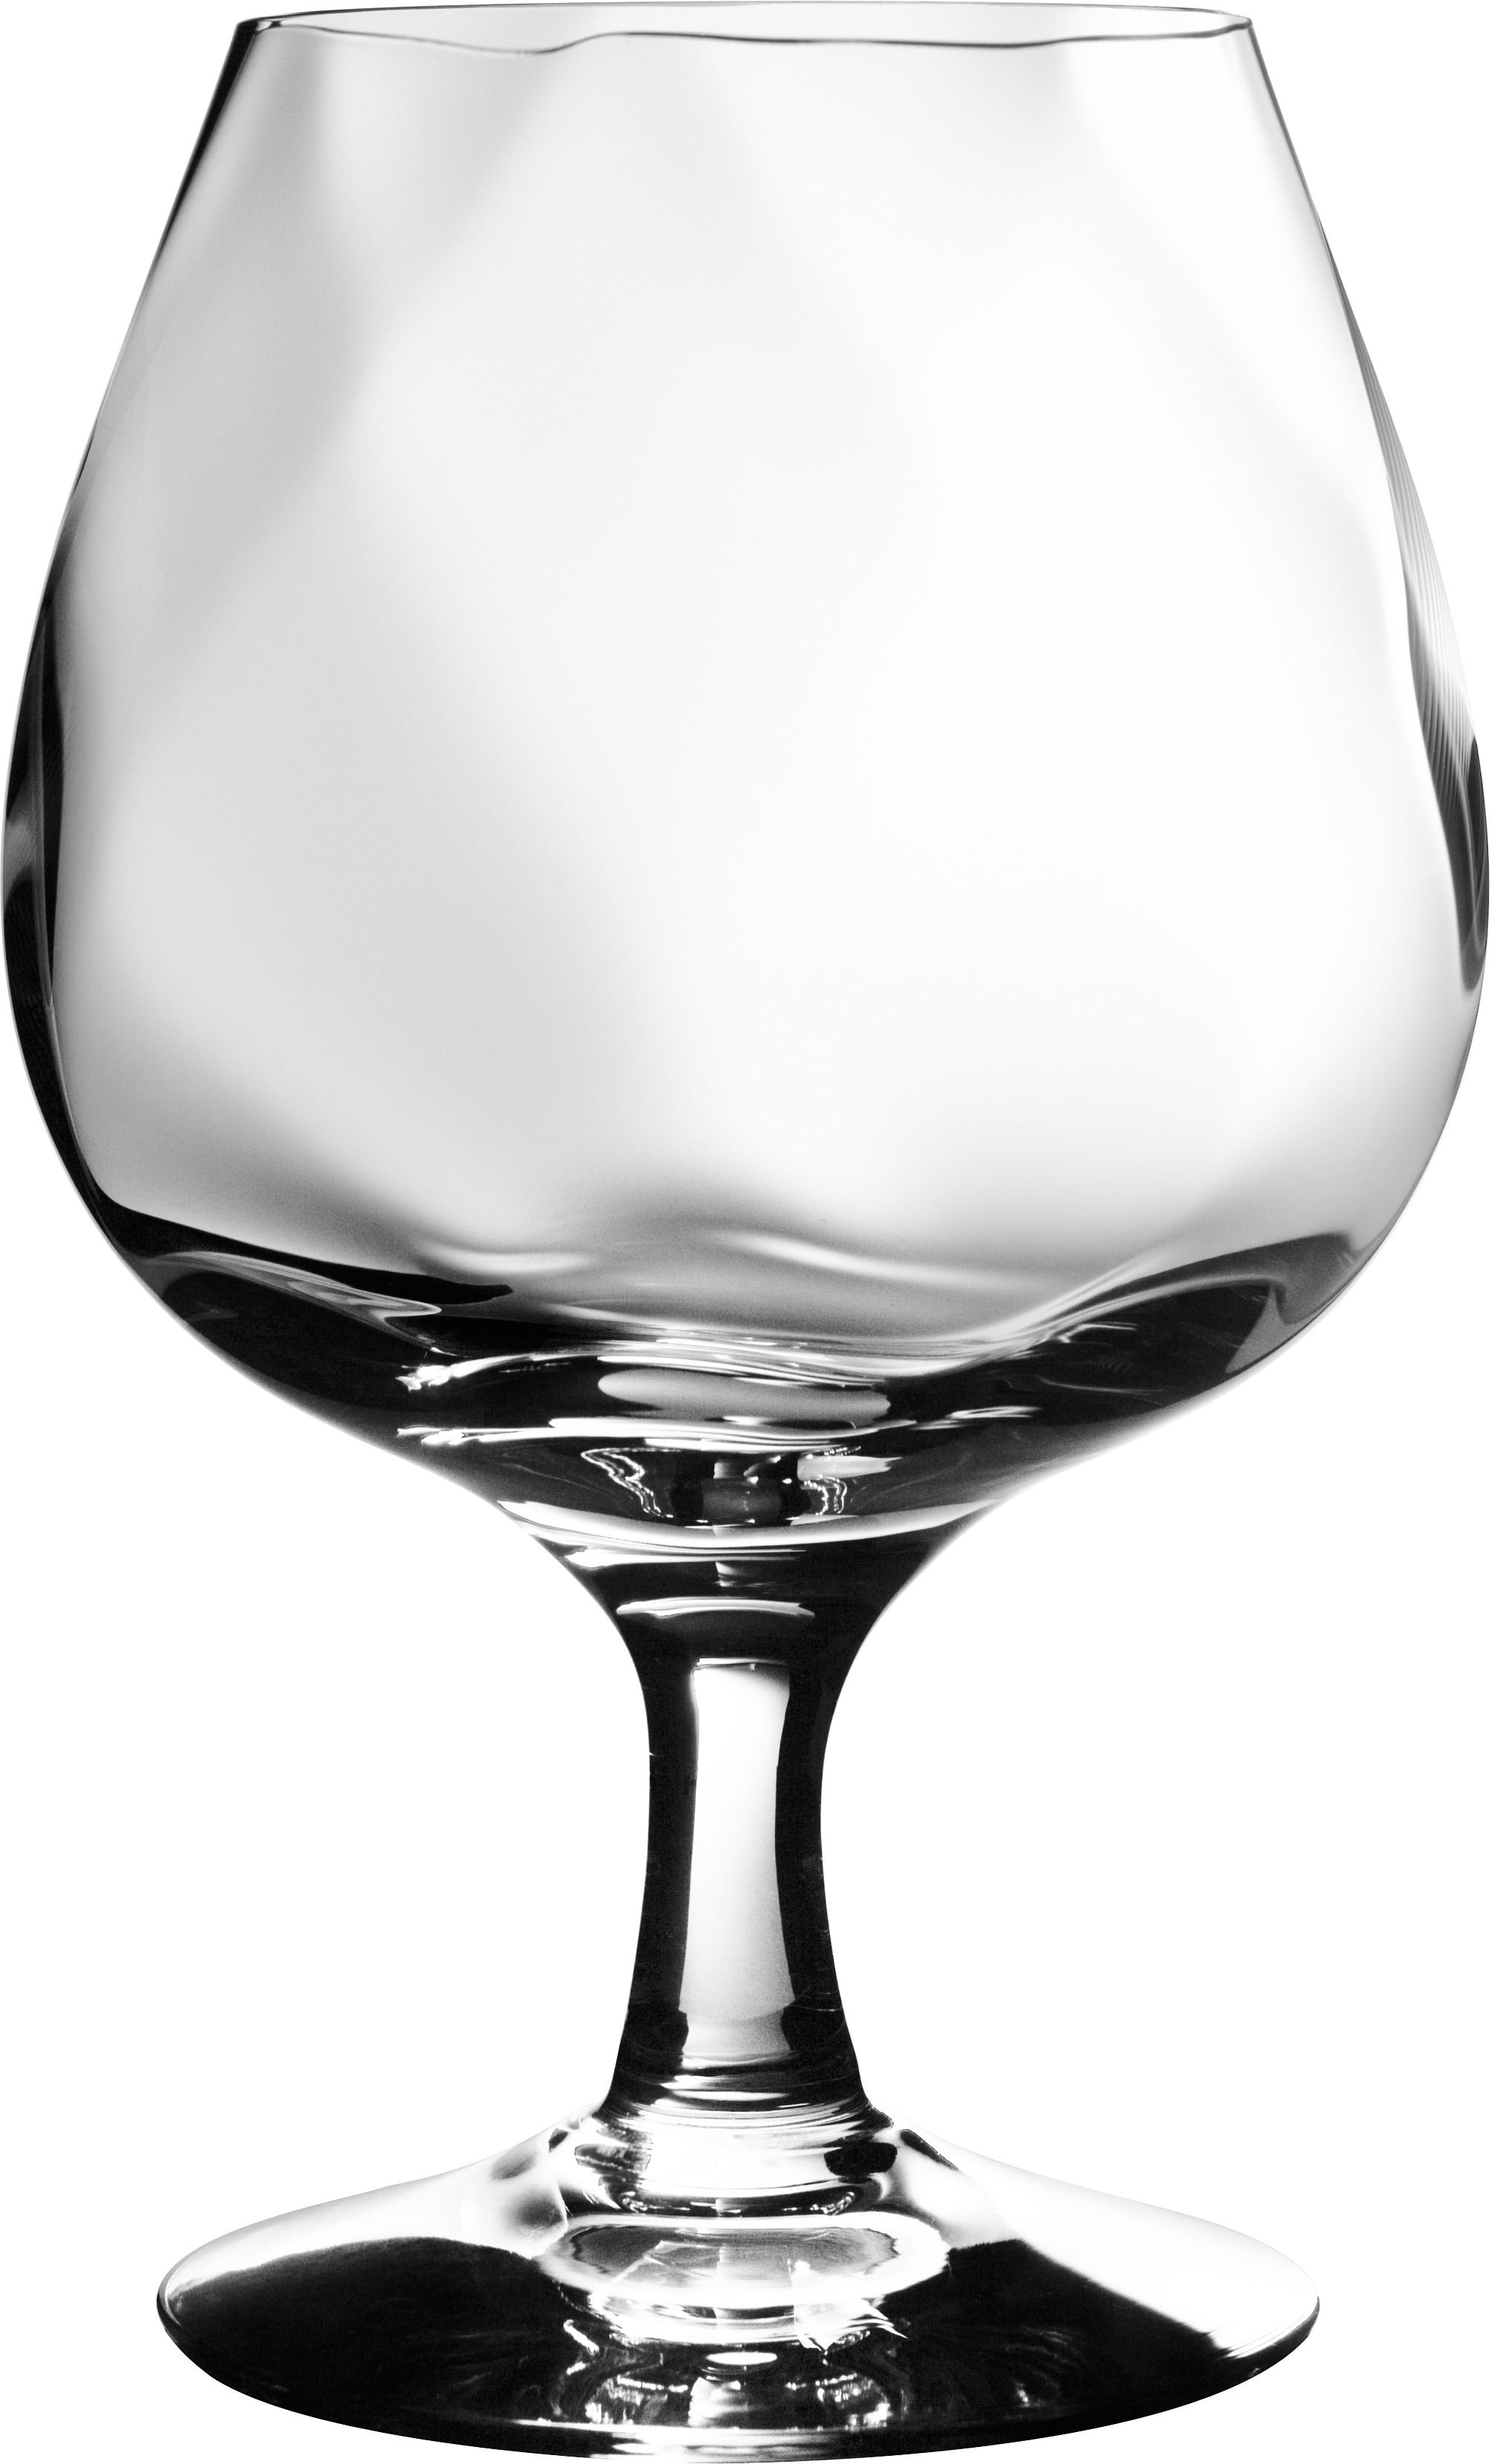 Drinking Glass PNG Transparent Image